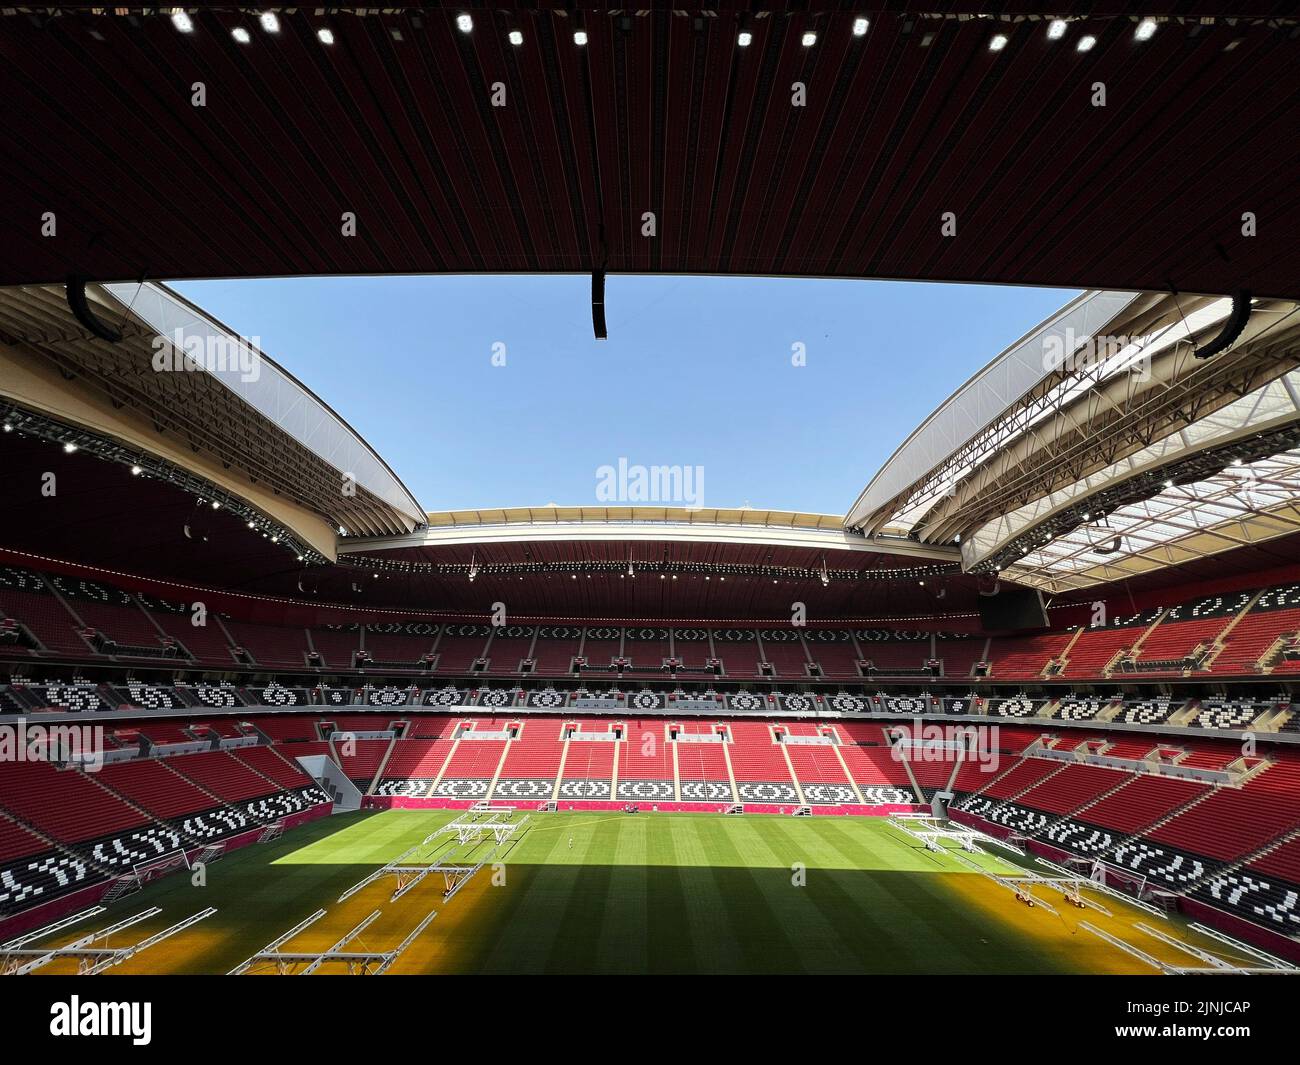 Doha. 14th June, 2022. Photo taken on June 14, 2022 shows the interior view of Al Bayt Stadium which will host the 2022 FIFA World Cup matches in Doha, Qatar. Credit: Wang Dongzhen/Xinhua/Alamy Live News Stock Photo